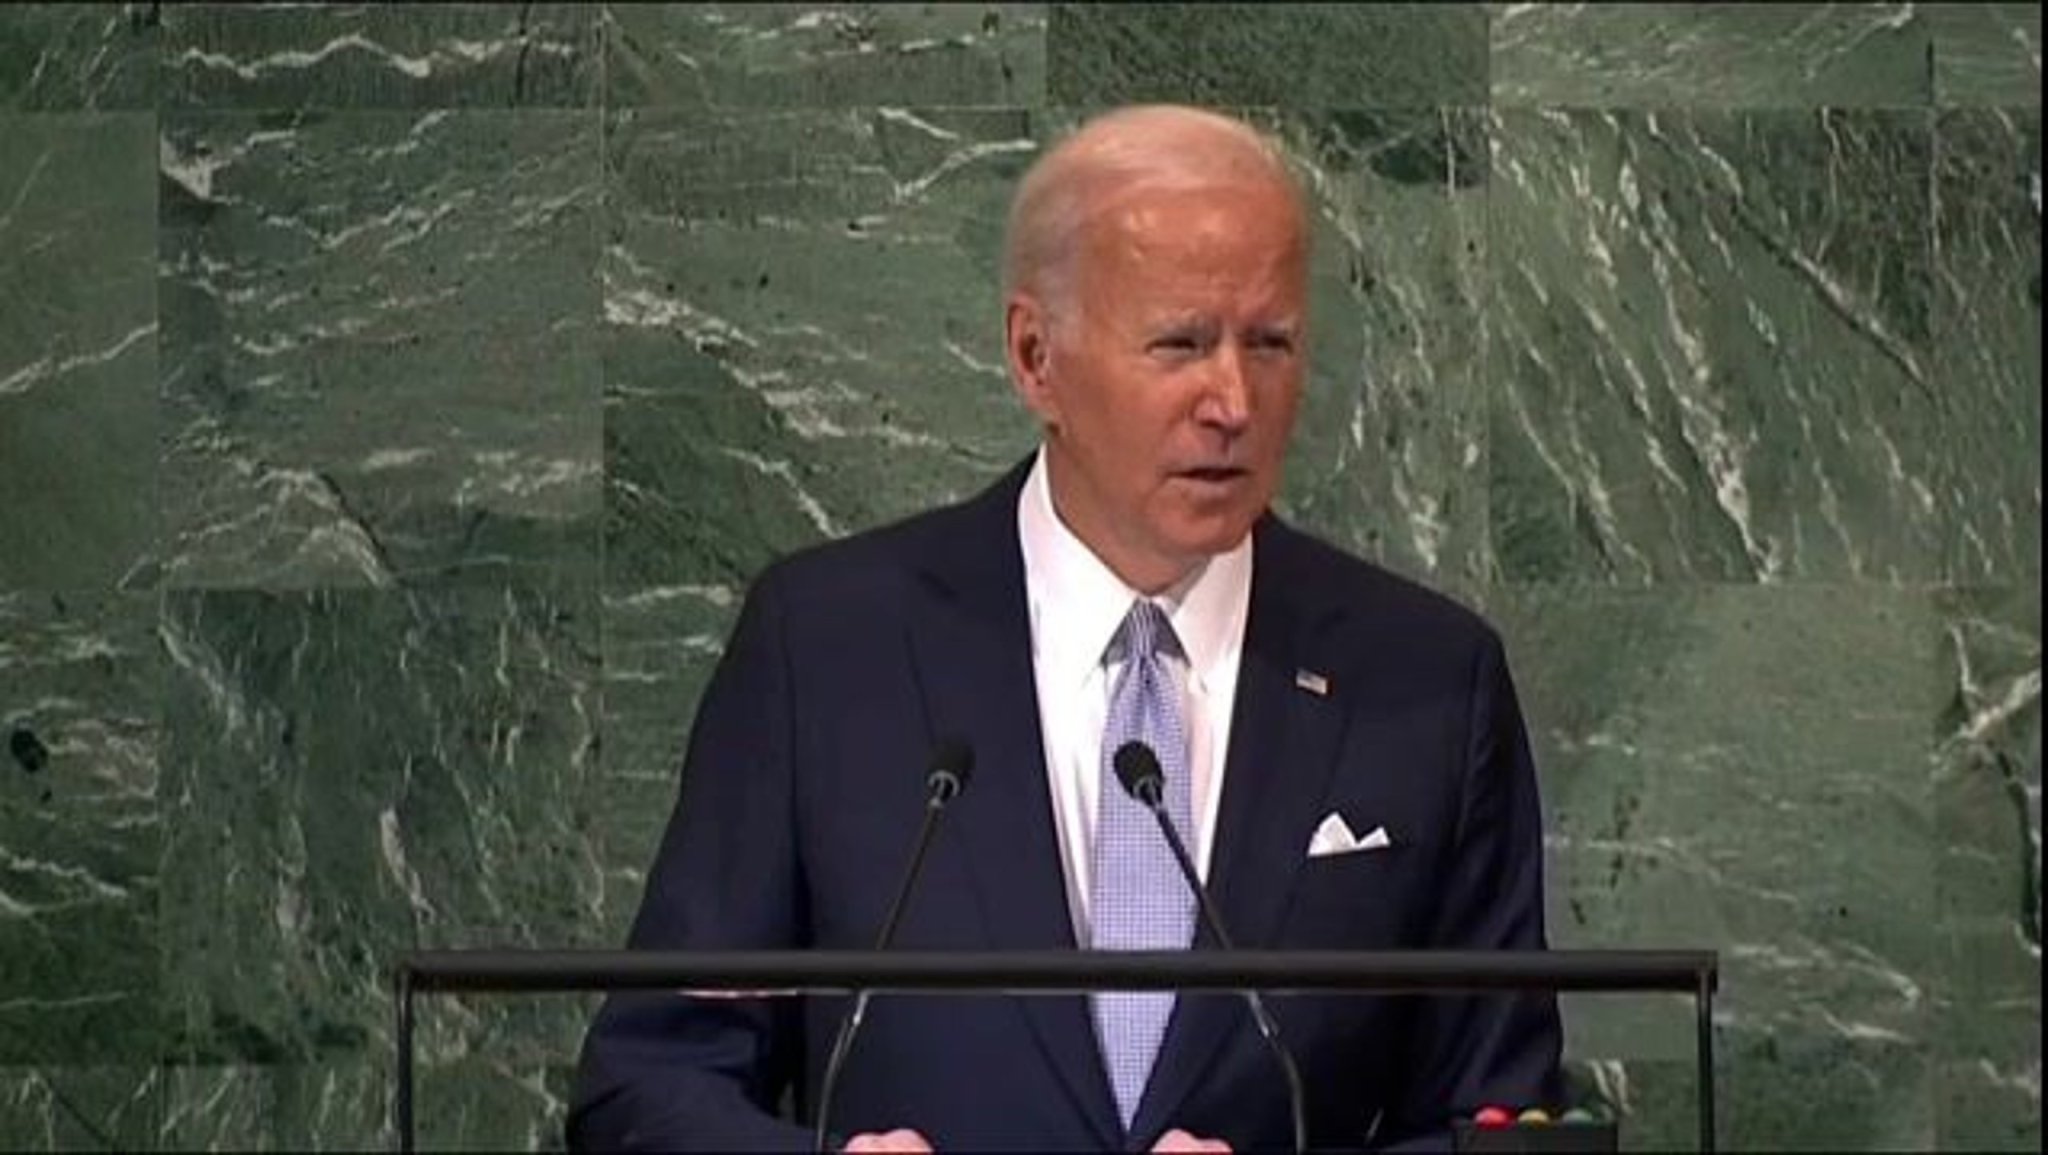 Biden recognizes the recent protests in Iran after the death of Mahsa Amini.